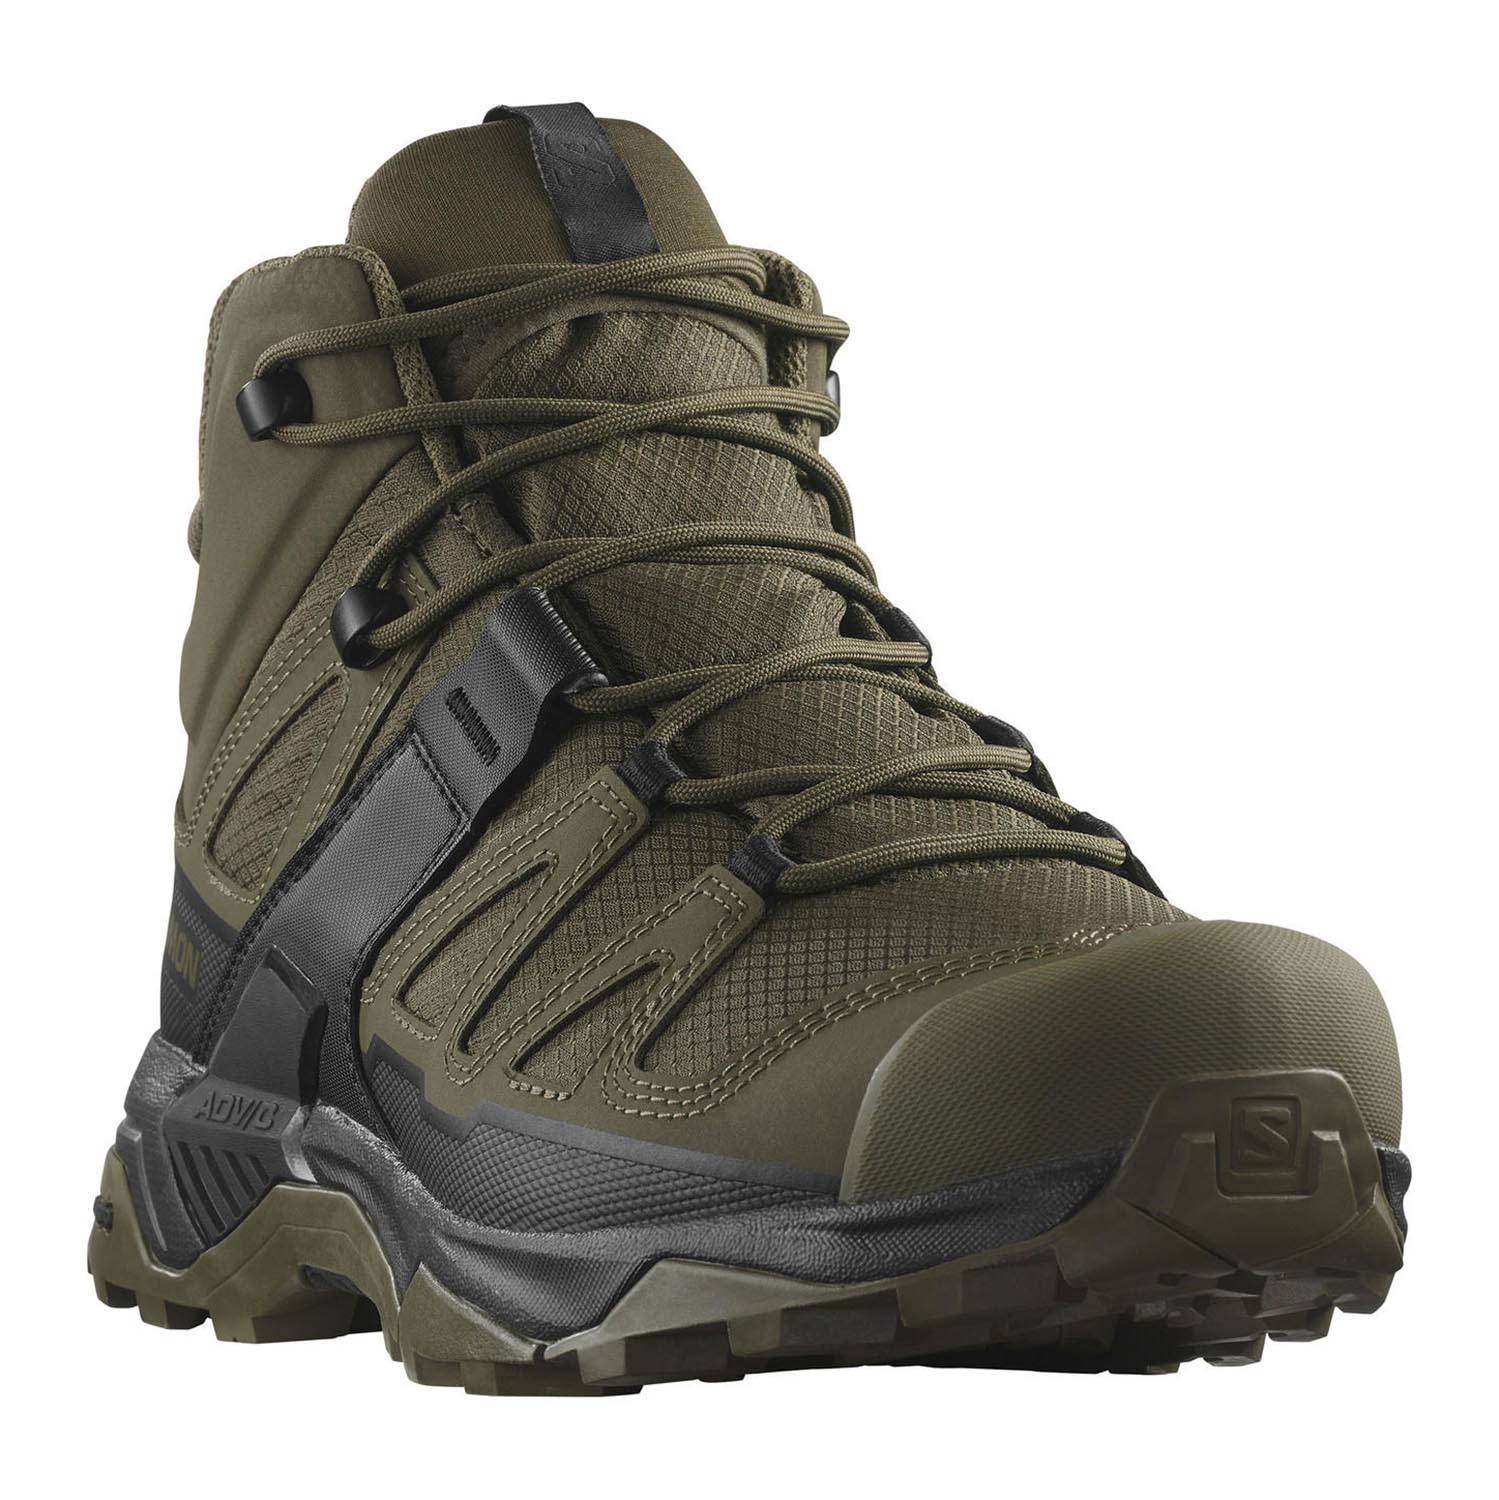 SALOMON X ULTRA FORCES MID BOOTS